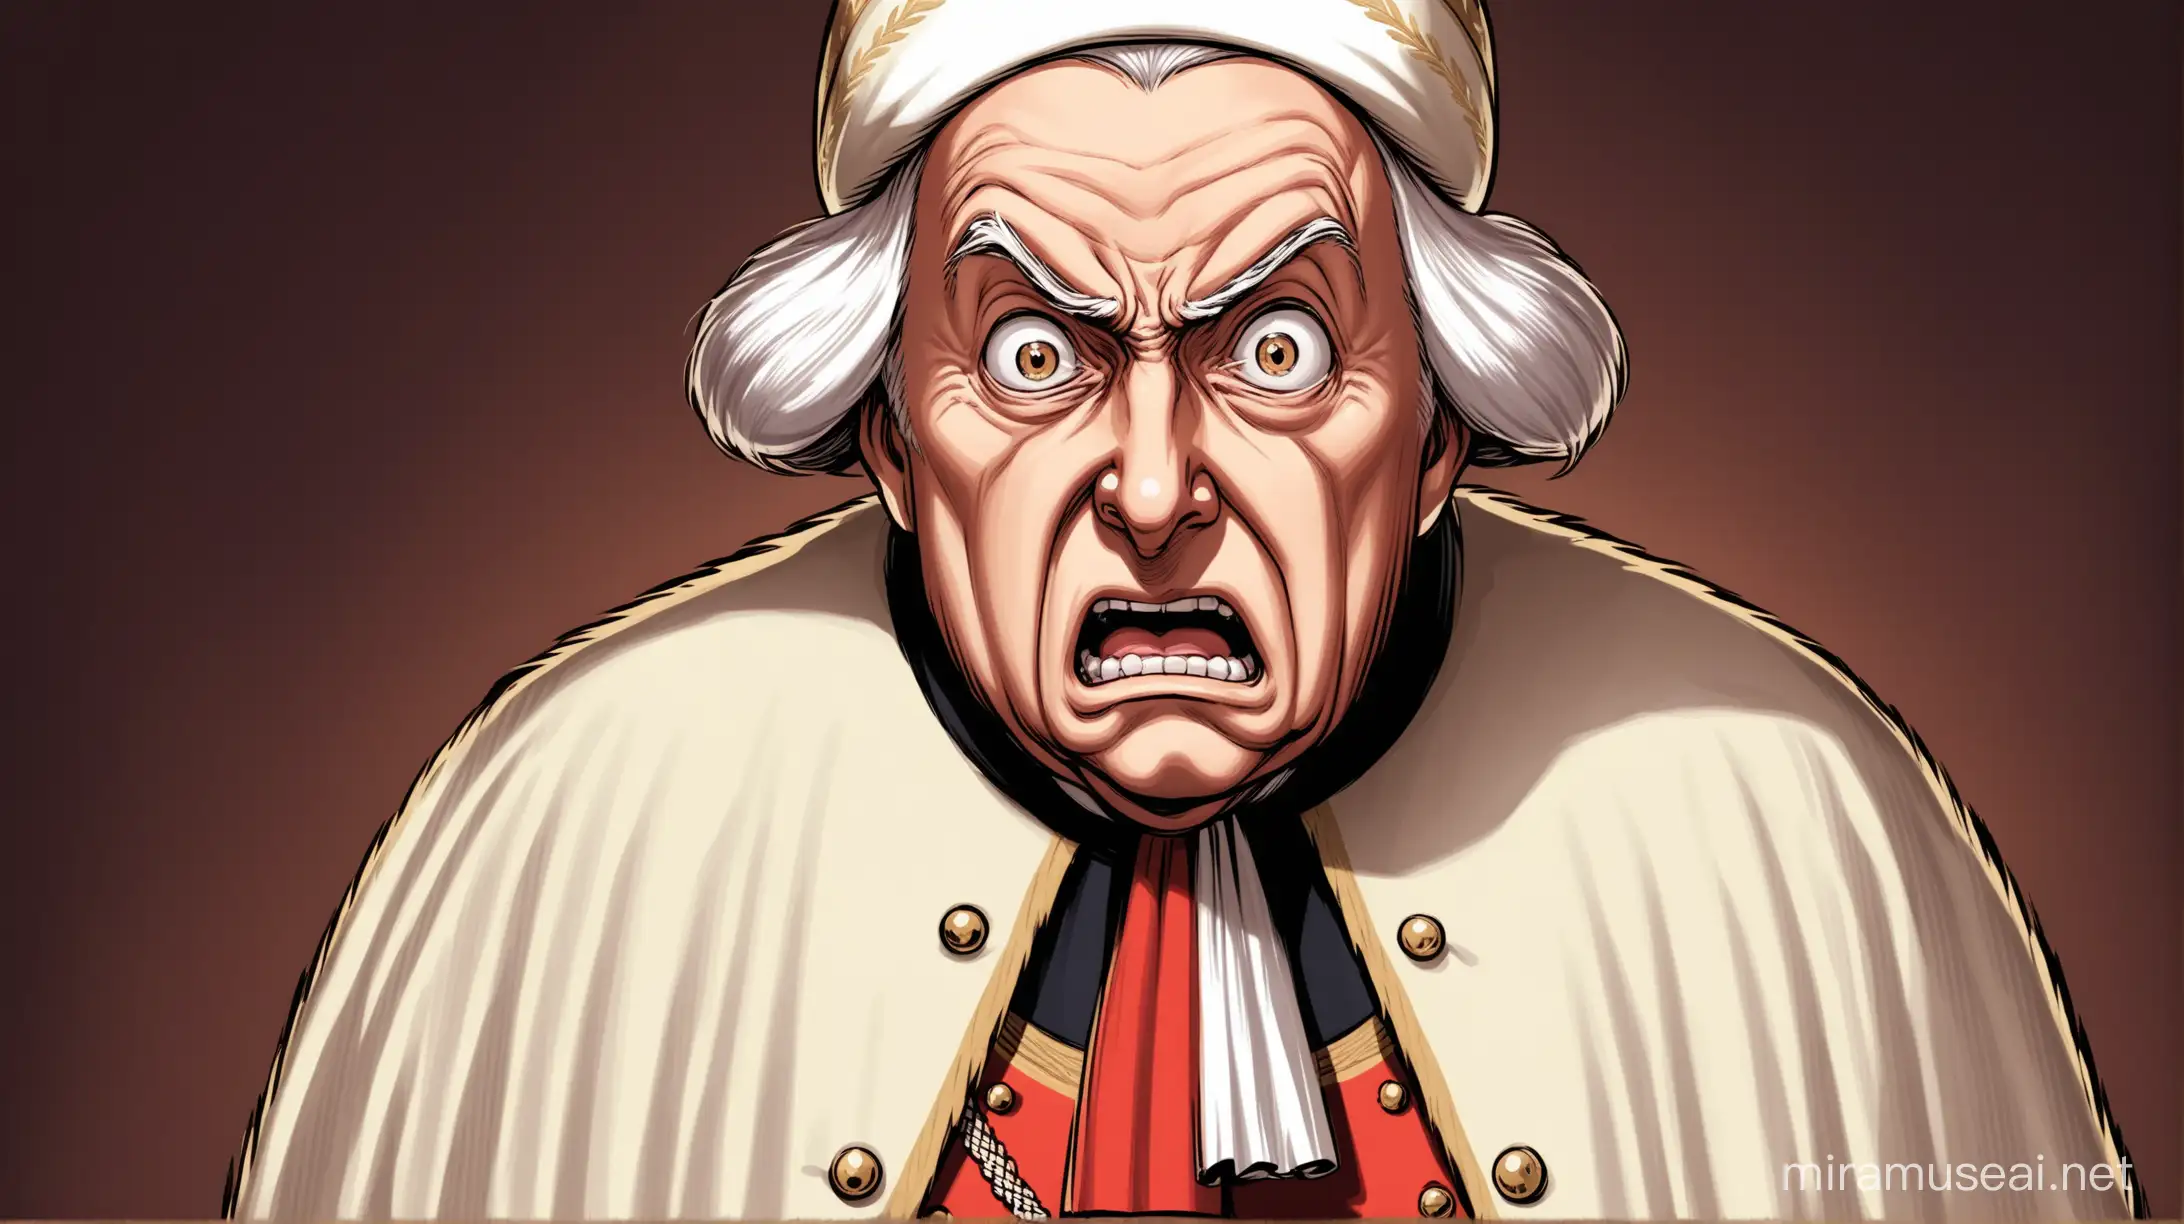 colonial british ruler with scared expression in his face


